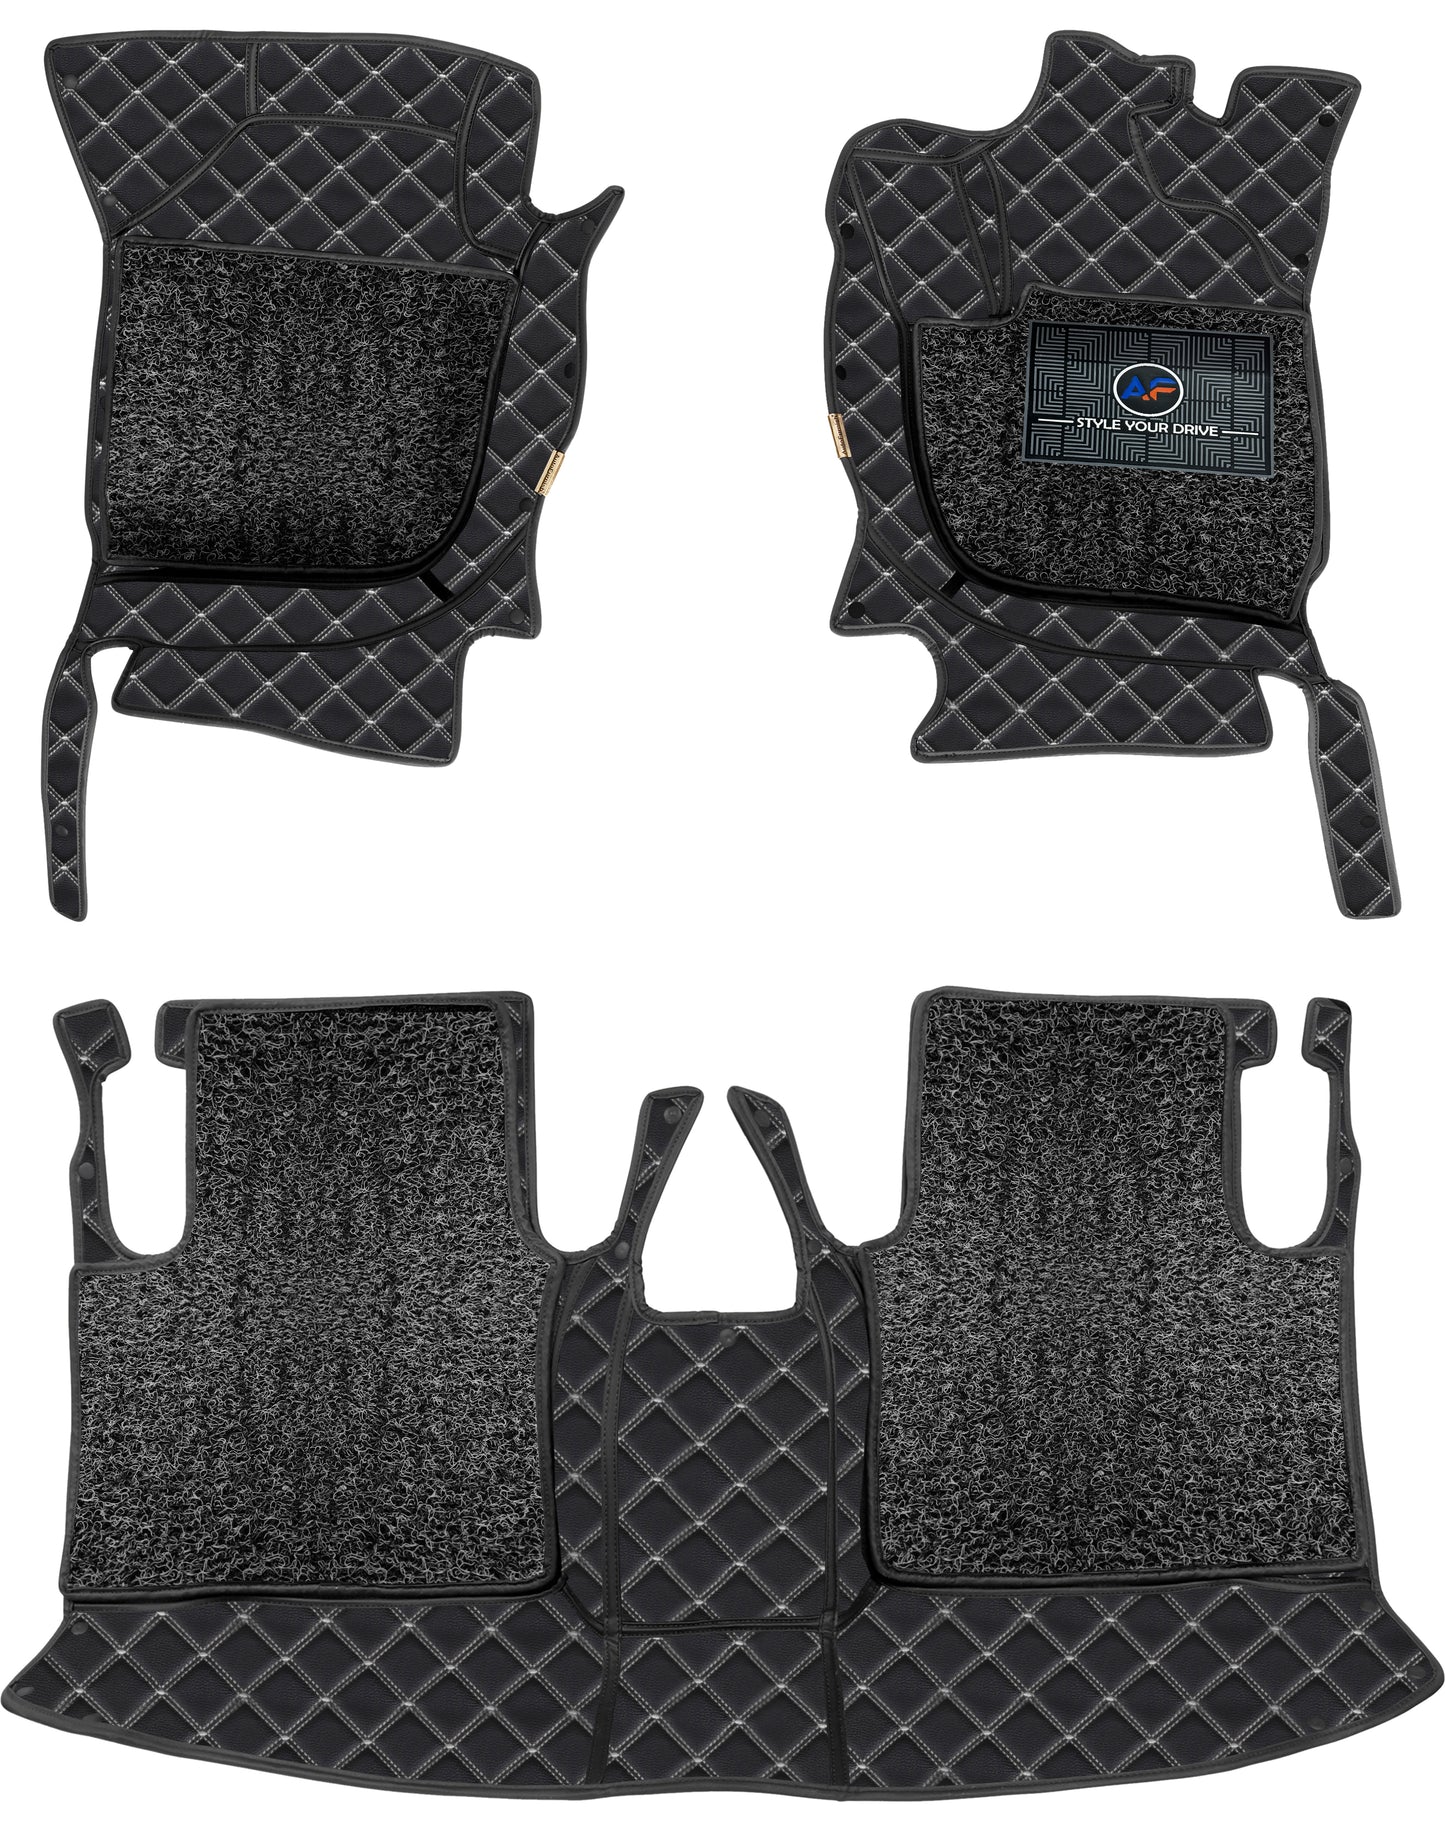 Volkswagen Jetta 2008-17-7D Luxury Car Mat, All Weather Proof, Anti-Skid, 100% Waterproof & Odorless with Unique Diamond Fish Design (24mm Luxury PU Leather, 2 Rows)